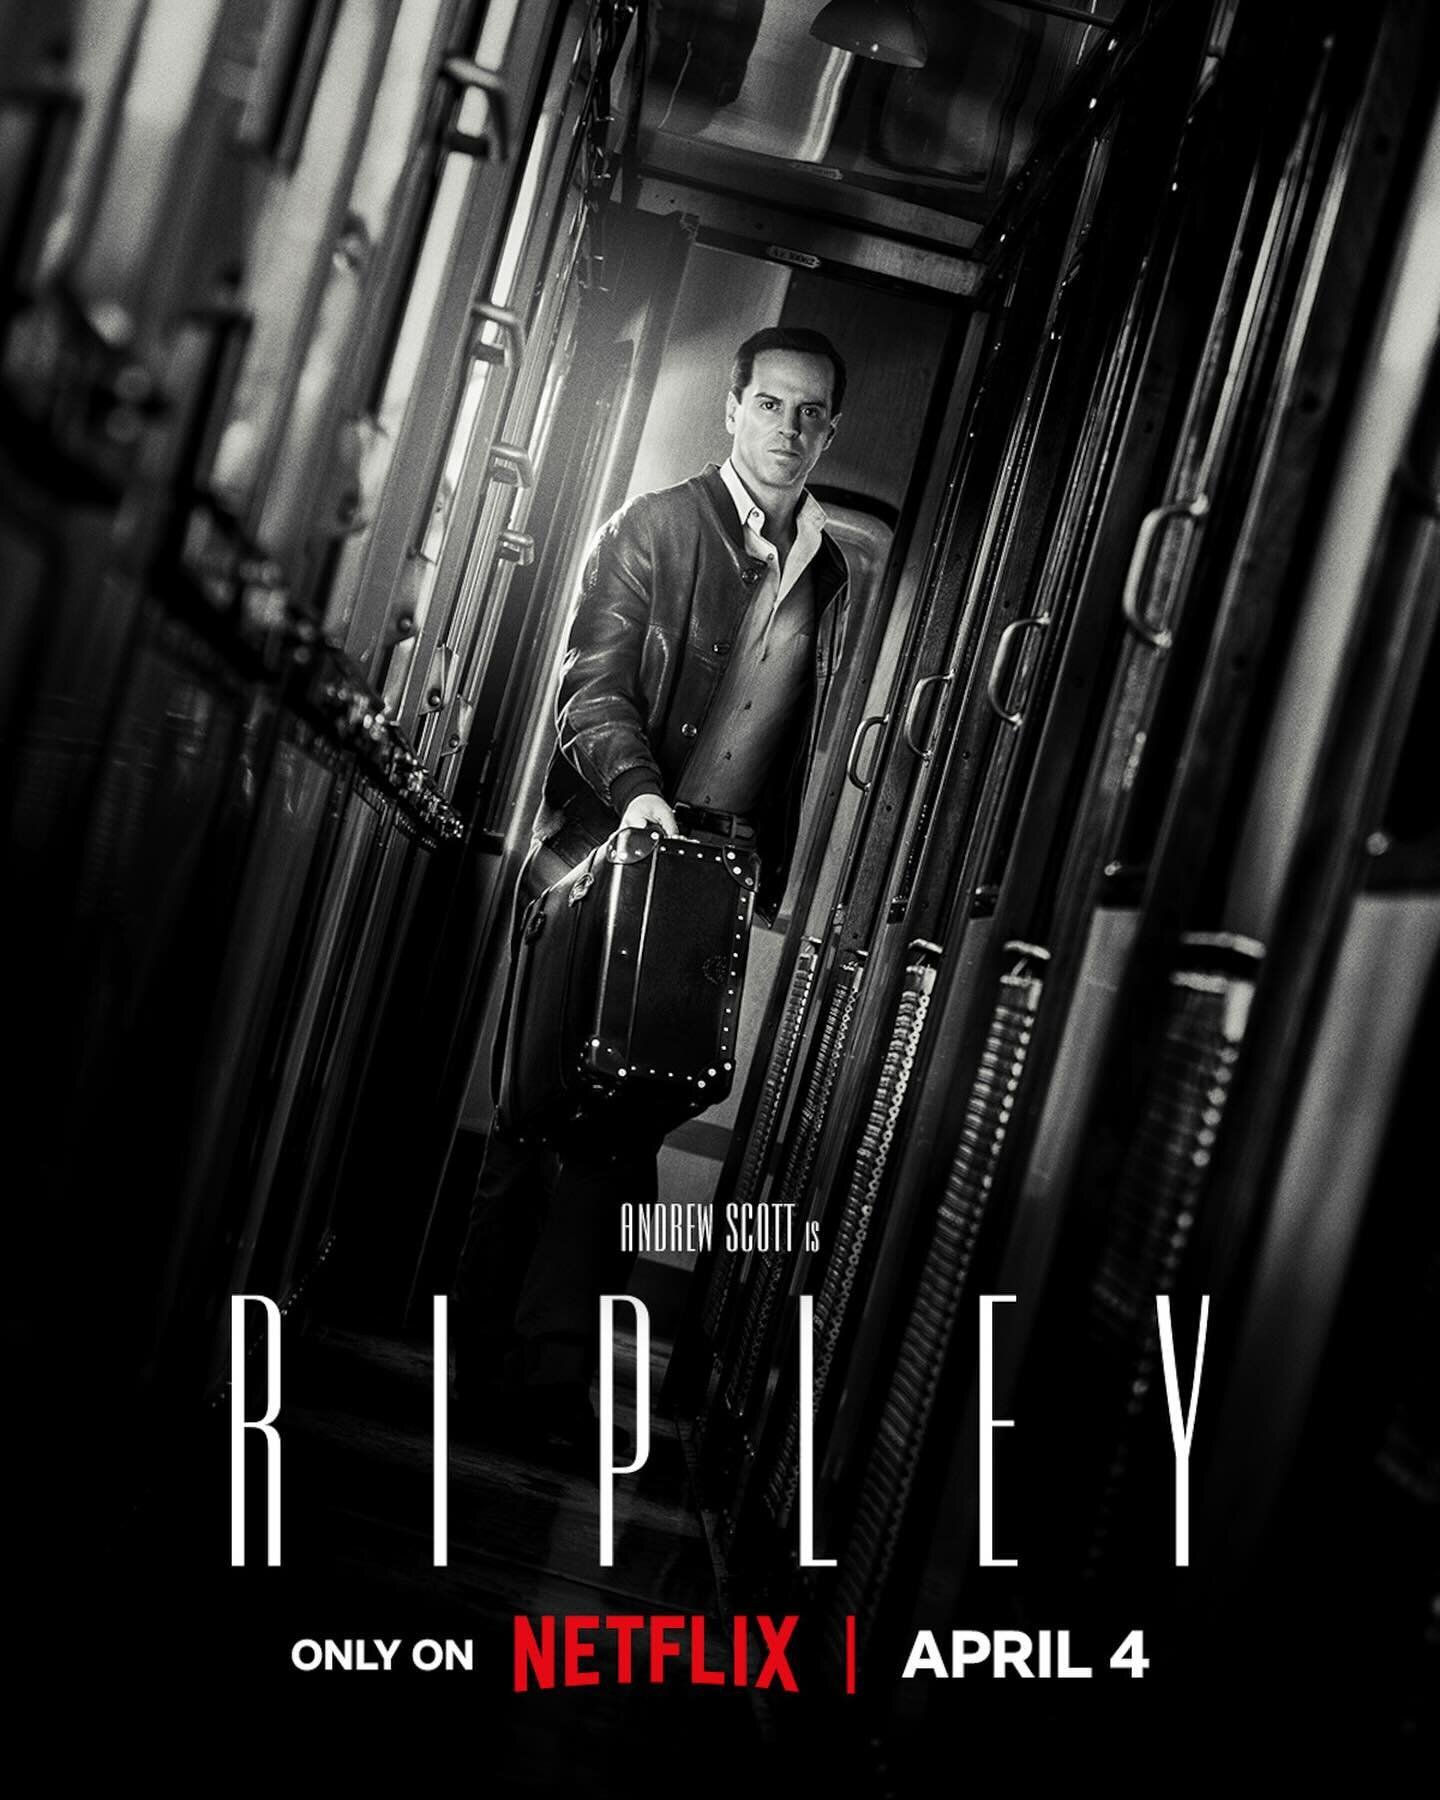 What he lacked in morals, he made up for with great taste in luggage &hellip; @globe_trotter1897 @ripleynetflix #andrewscott #thetalentedmrripley